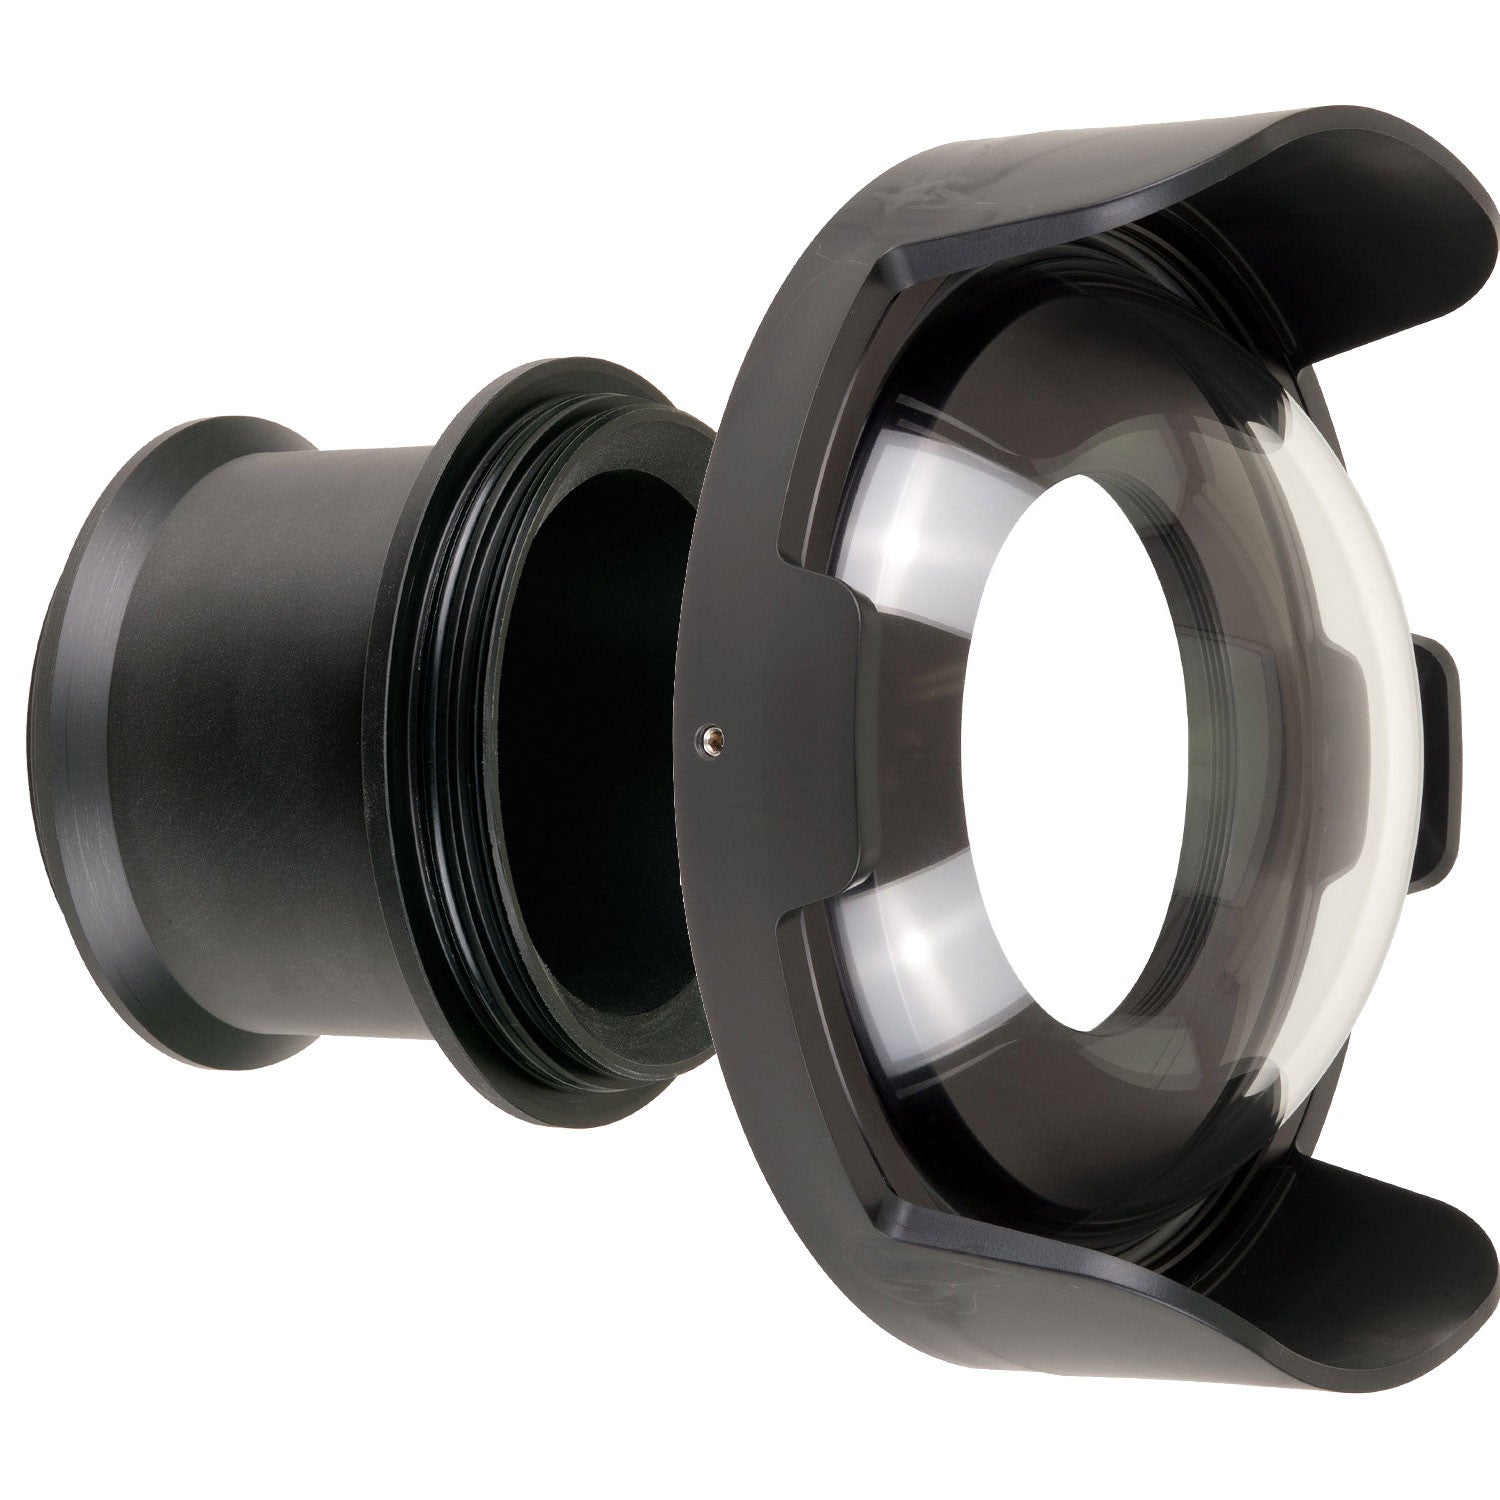 FL 8 inch Dome Kit for Lenses Up To 5.1 Inches